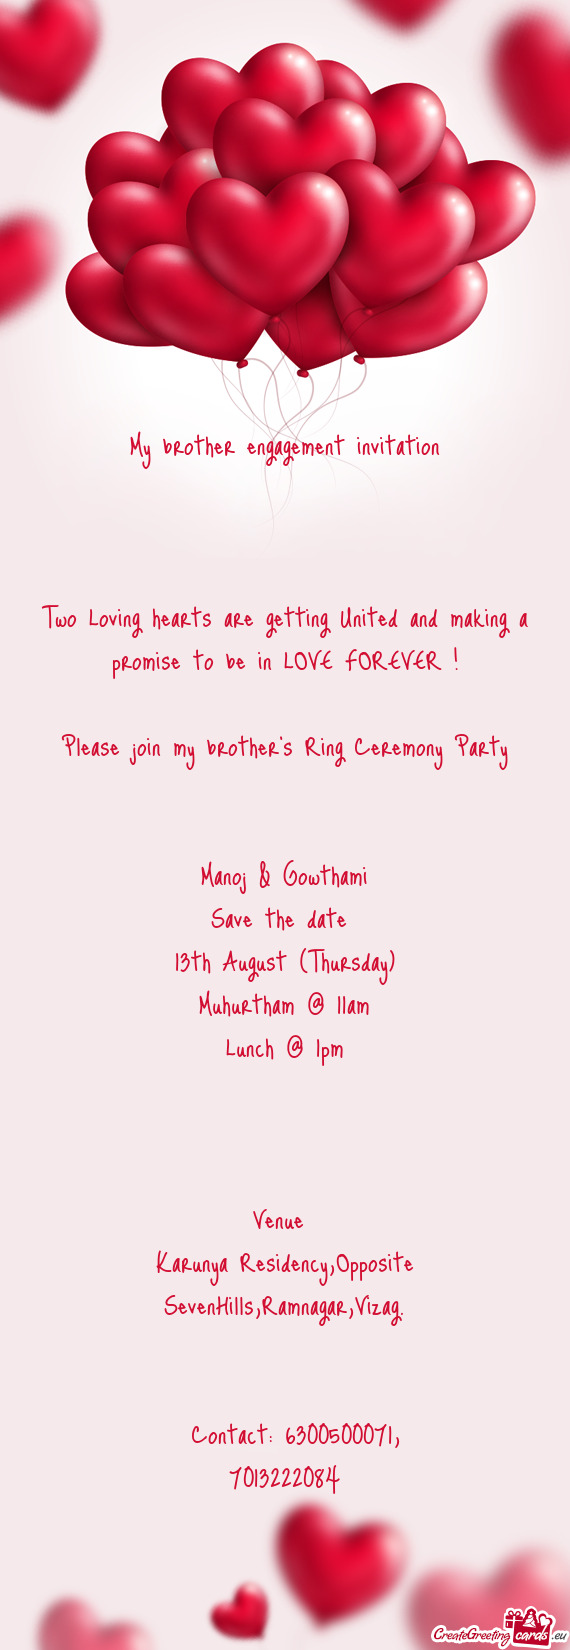 O be in LOVE FOREVER !
 
 Please join my brother's Ring Ceremony Party
 
 
 Manoj & Gowthami
 Save t